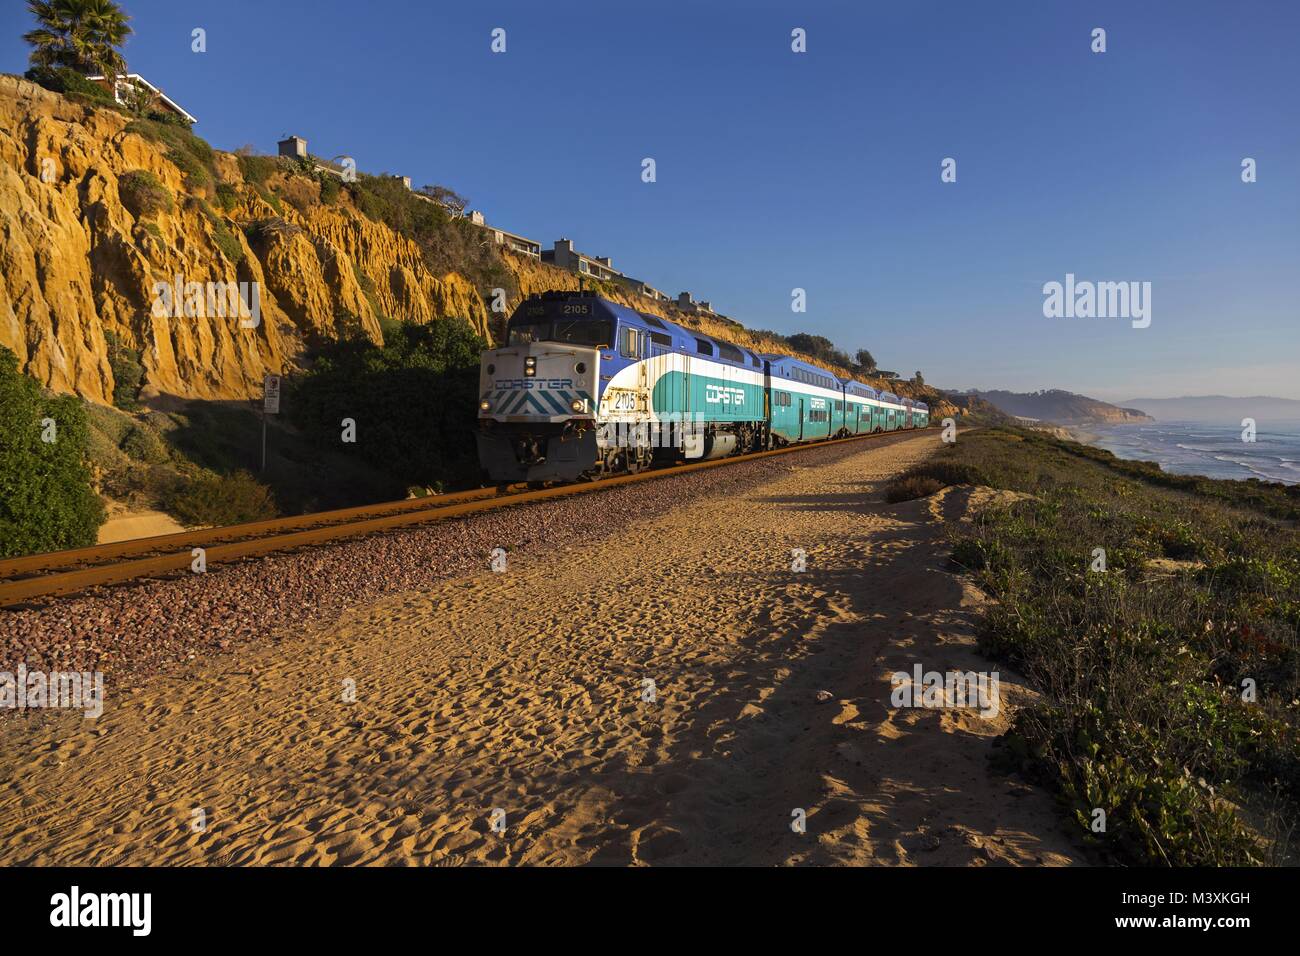 Die Coaster High Speed Commuter Train Railroad Line Northbound Direction Fast Travel Del Mar Heights Pacific Ocean Heights San Diego California Coast Stockfoto